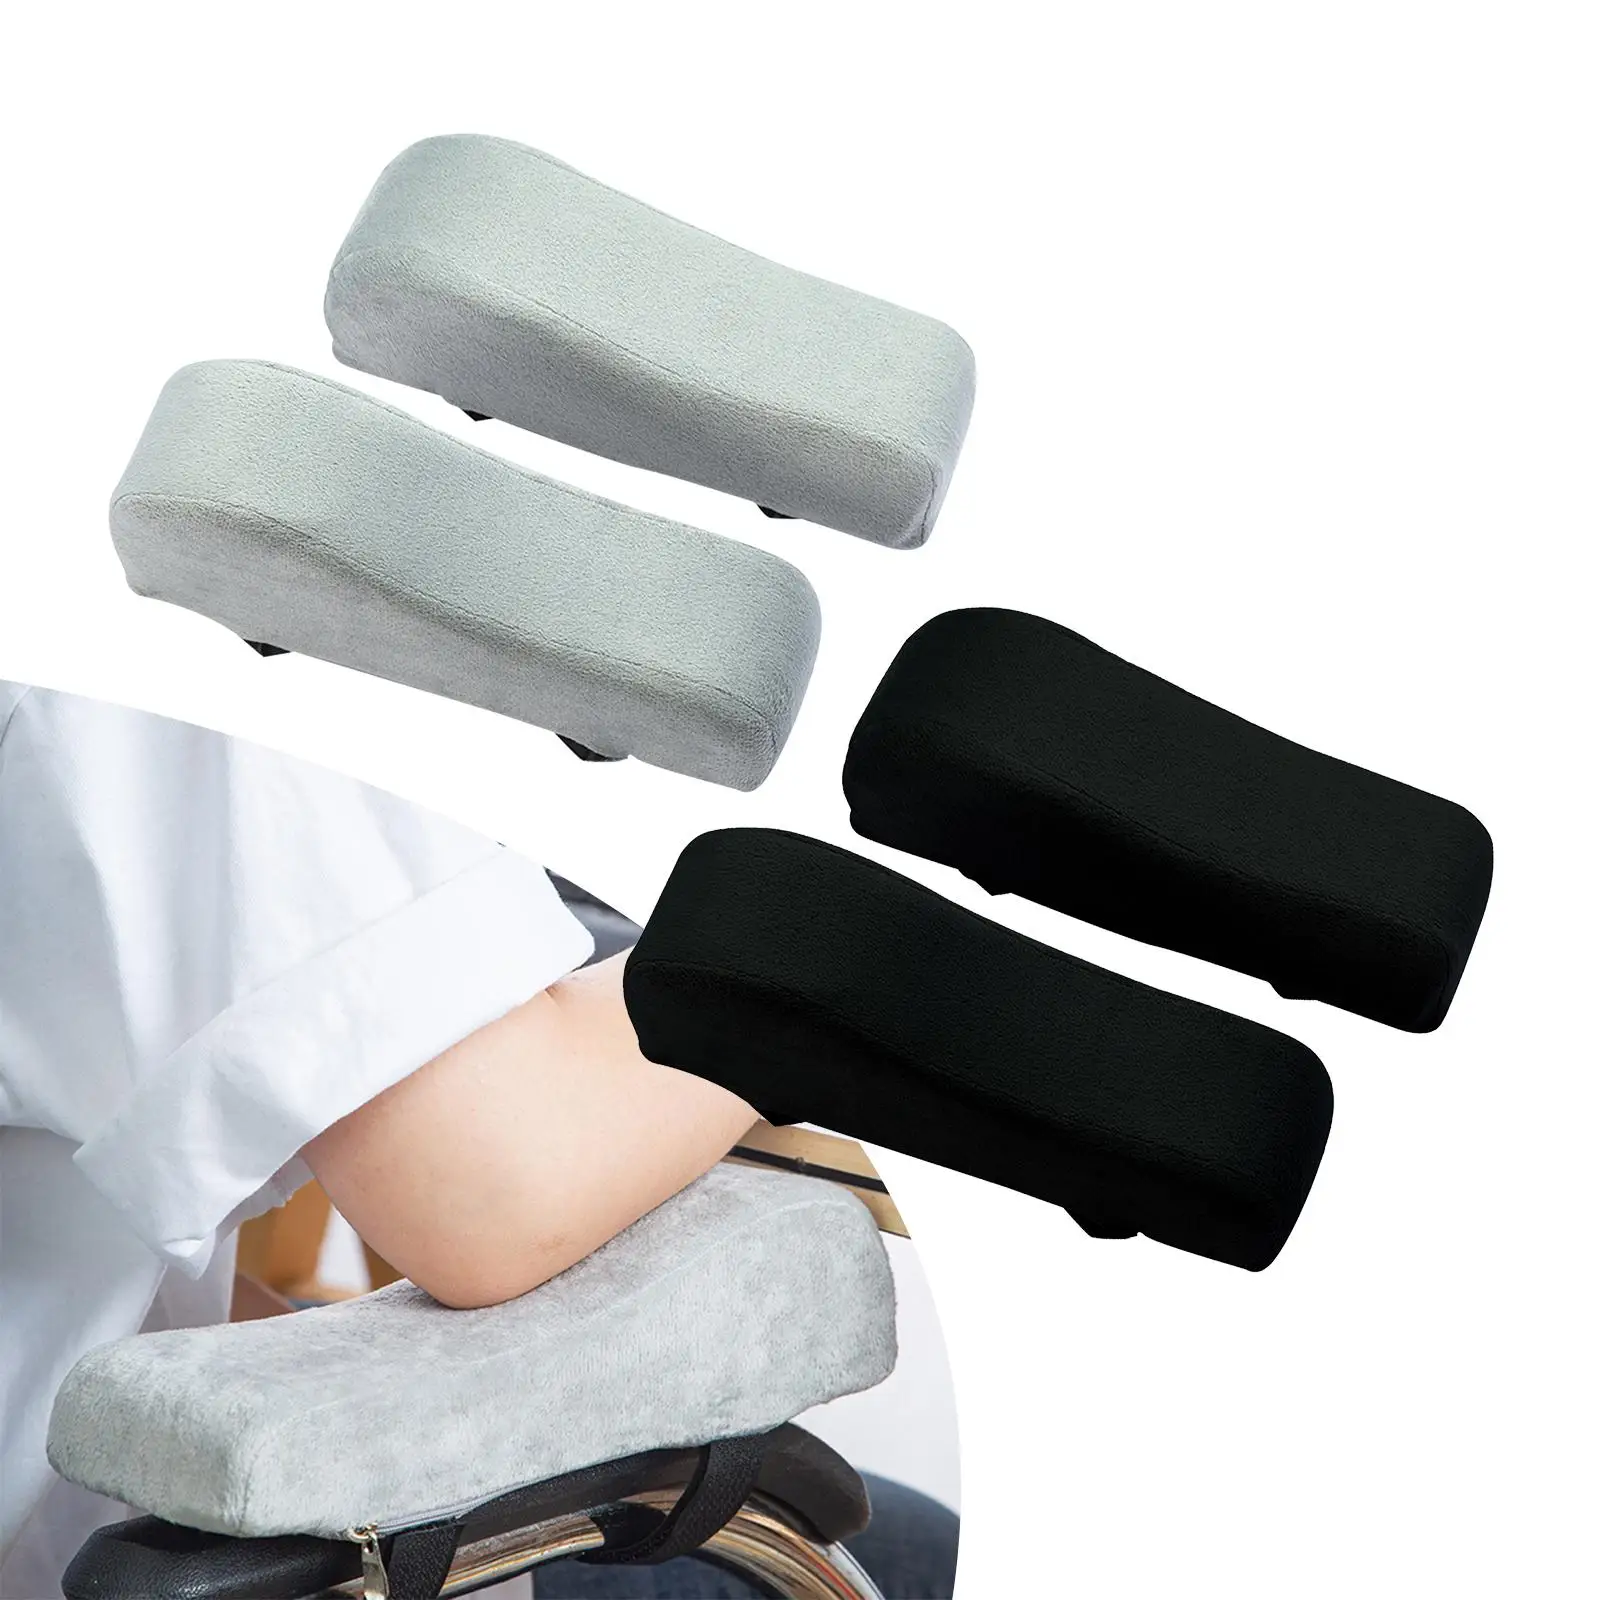 2x Universal Chair Armrest Cushions Soft Washable Arm Pads for Rocking Chair Offiice Home